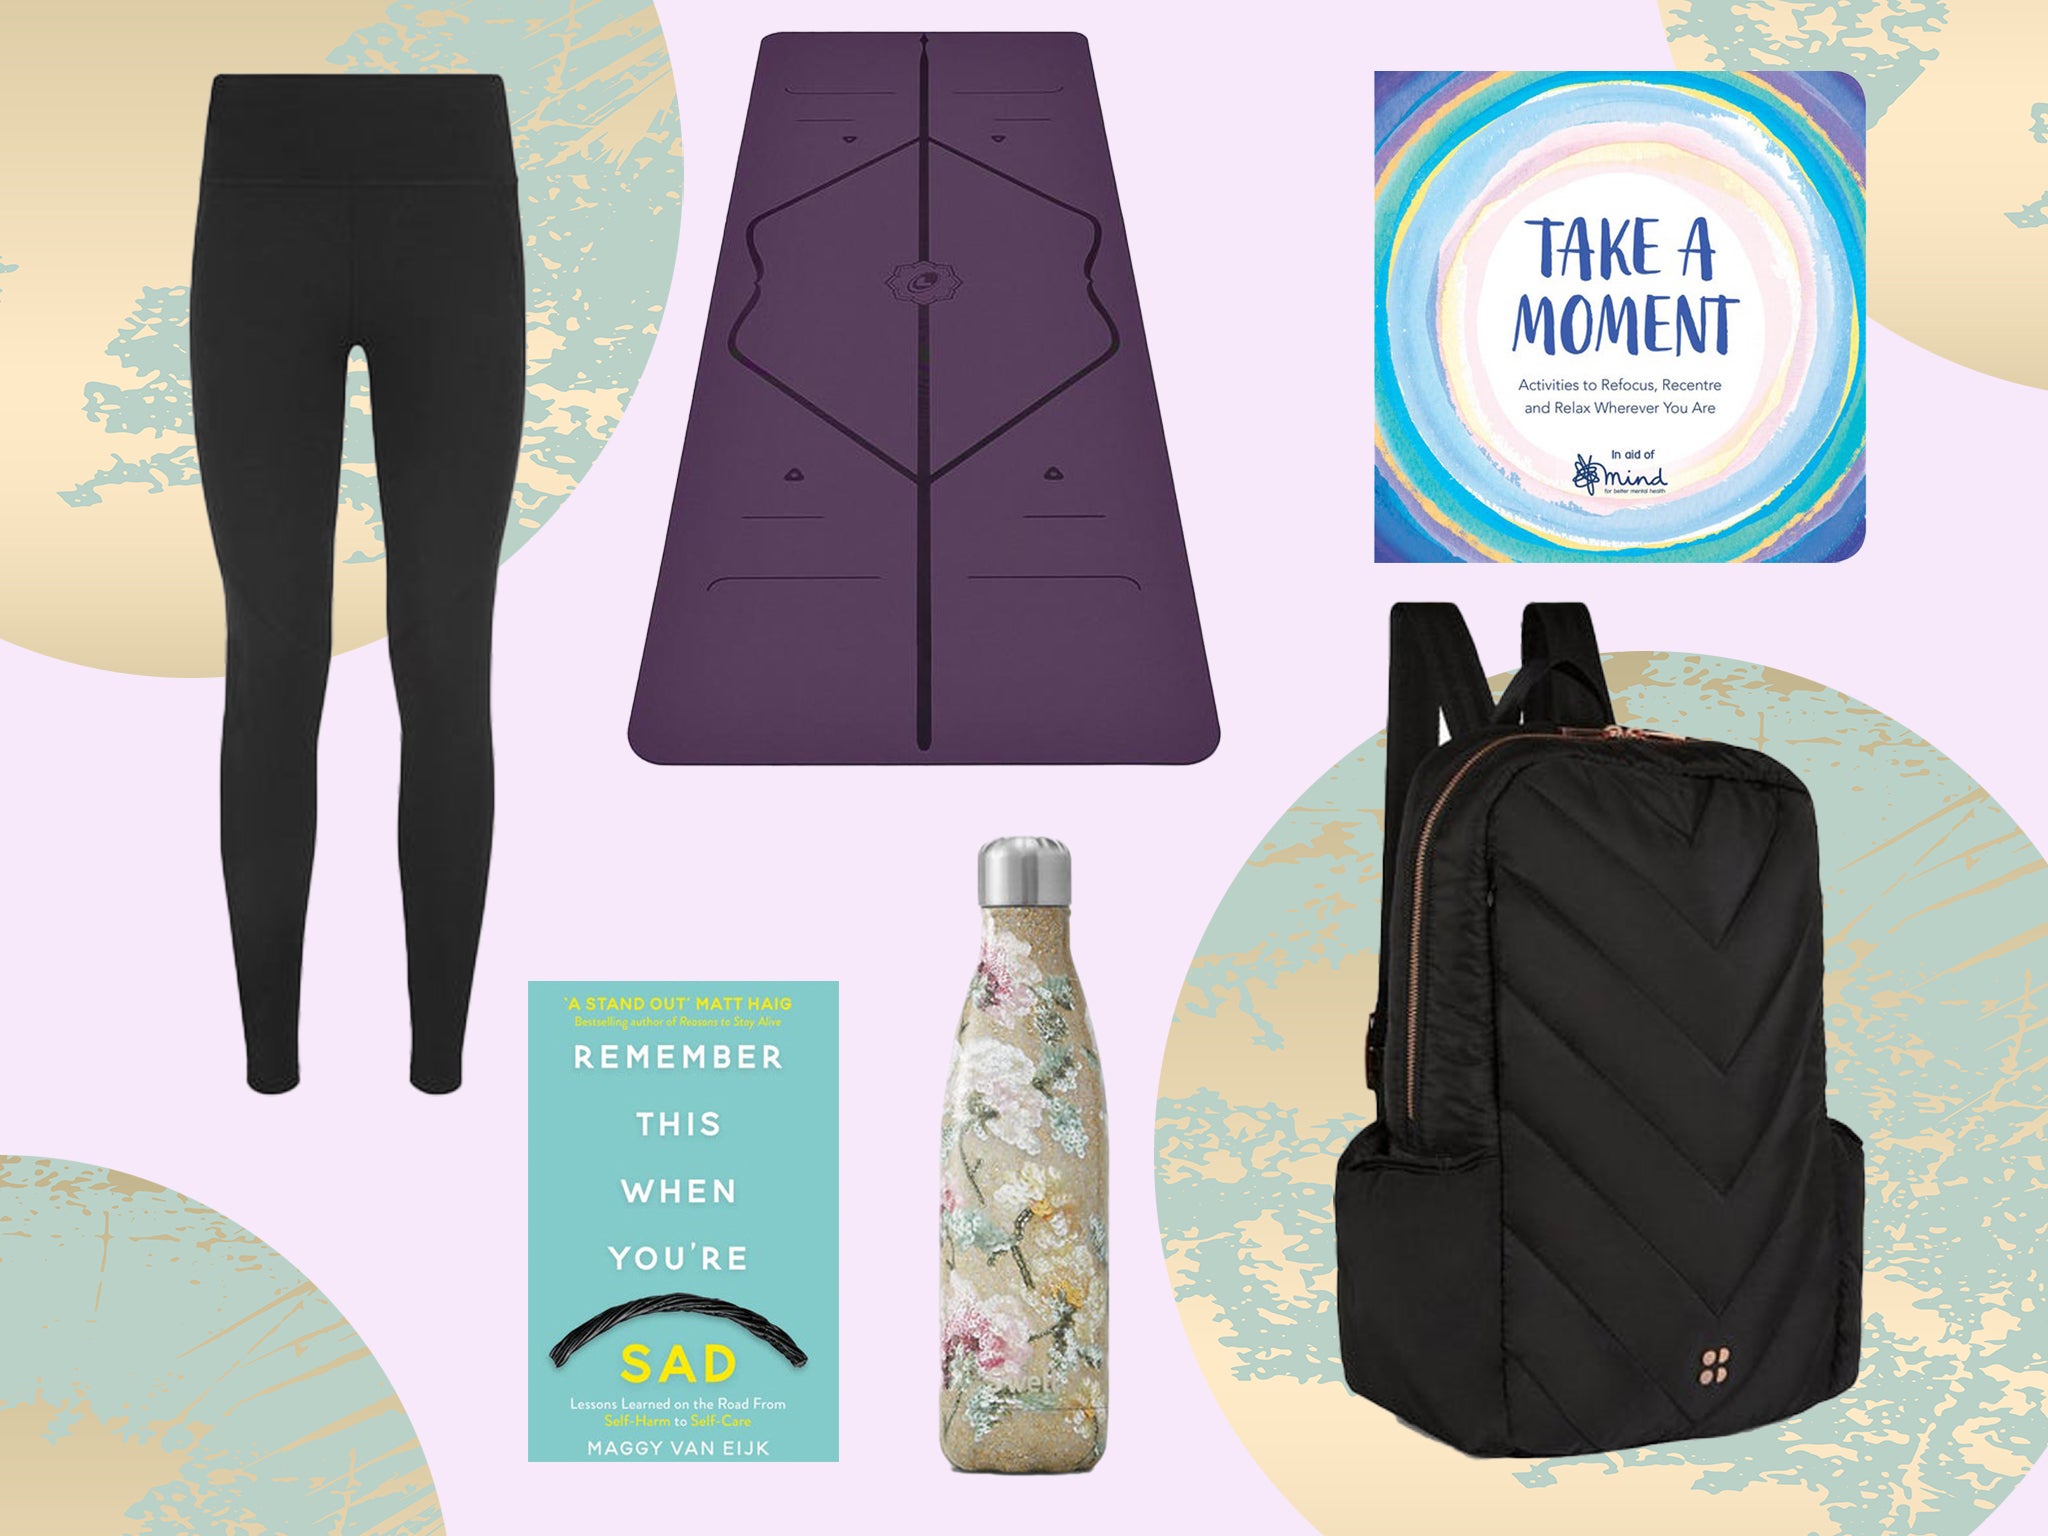 Best Christmas gifts for yoga lovers: From yoga mats to gym bags